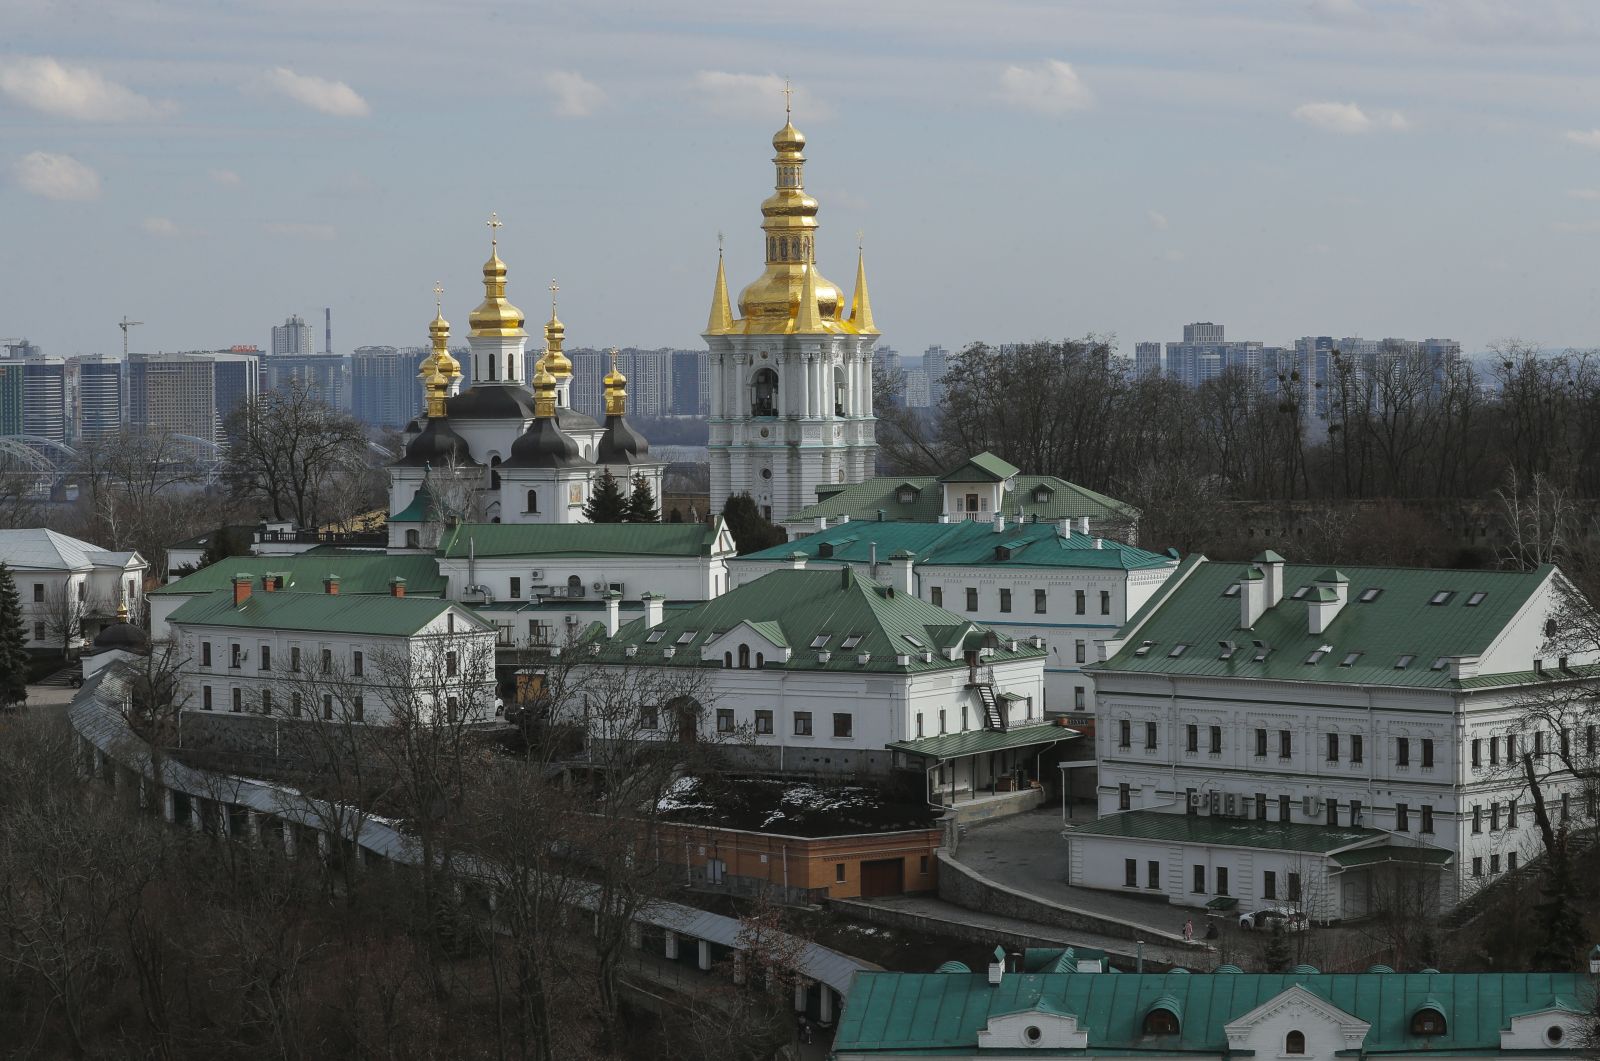 epa10521125 A view of the Kyiv-Pechersk Lavra monastery complex in Kyiv (Kiev), Ukraine, 13 March 2023, amid Russia's invasion. Ukraine's Ministry of Culture released a statement on 10 March 2023 saying that the National Reserve 'Kyiv-Pechersk Lavra' sent a warning to the Kyiv-Pechersk Lavra monastery of the Ukrainian Orthodox Church (Moscow Patriarchate) about the termination of a July 2013 agreement on the free use of religious buildings and other property that is owned by the state by a religious organization, adding that the Ukrainian Orthodox Church must vacate the state-owned premises it leases on monastery grounds by 29 March. The announcement follows a December 2022 presidential decree on the ban of activities by religious organizations associated with Russia in Ukraine. Russian troops entered Ukrainian territory on 24 February 2022, starting a conflict that has provoked destruction and a humanitarian crisis.  EPA/SERGEY DOLZHENKO